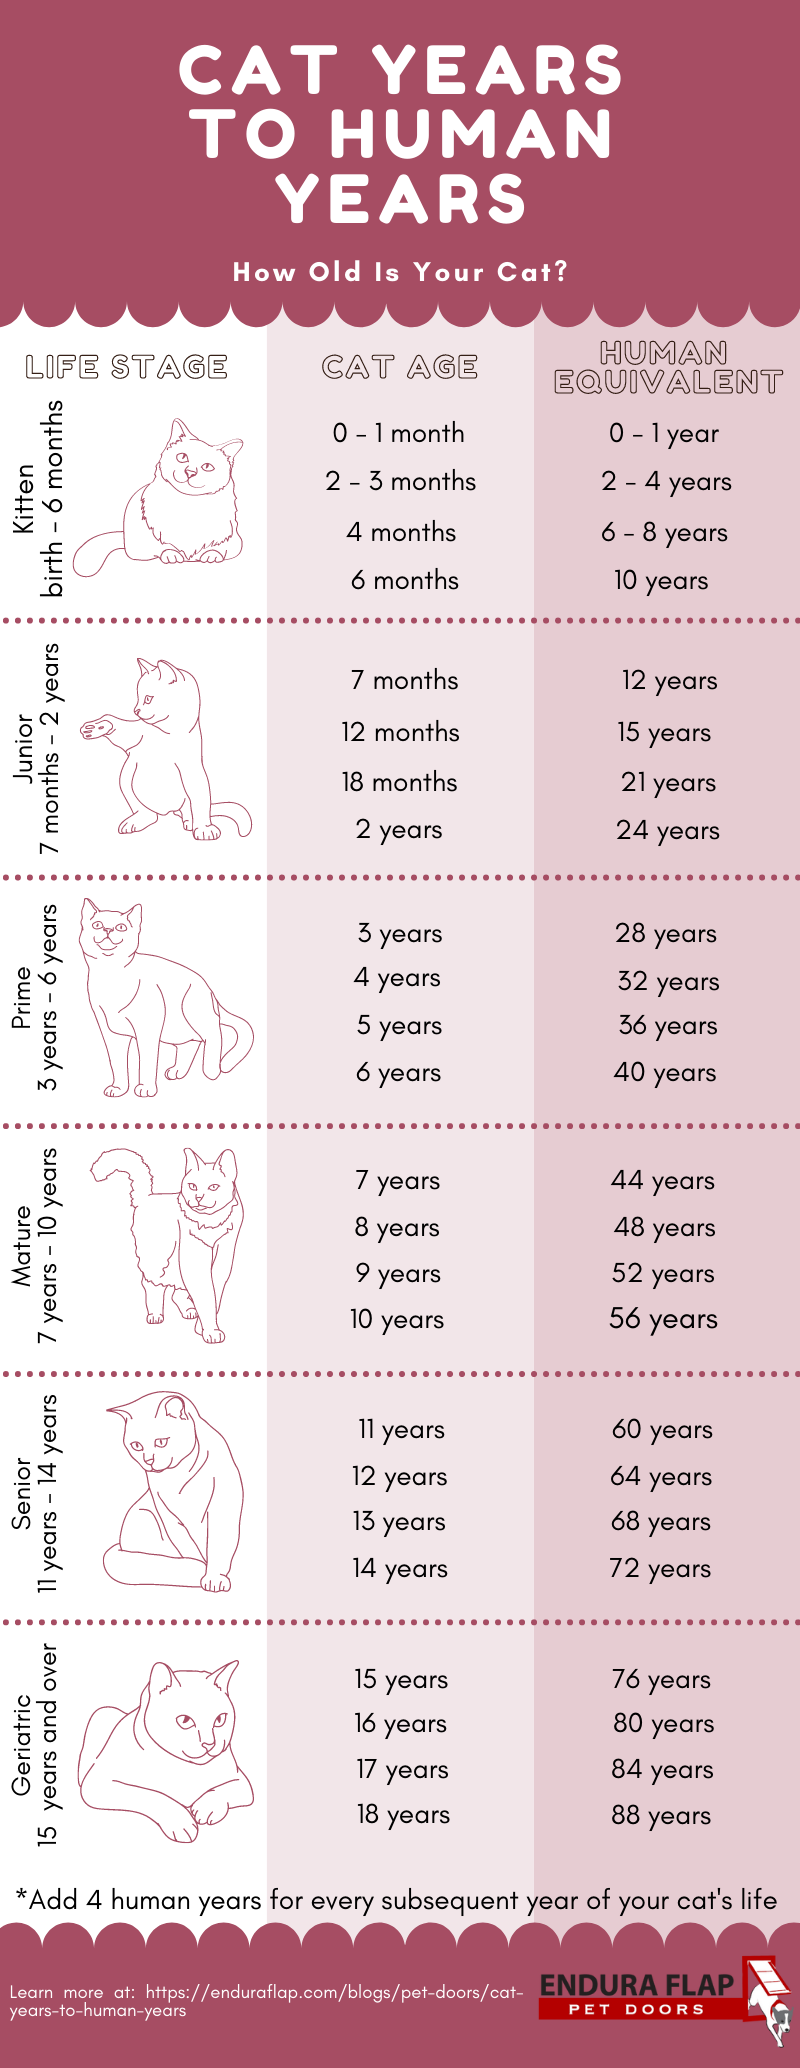 Cat Age Chart: Cat Years to Human Years | How Old Is My Cat? | The Old Farmer's Almanac